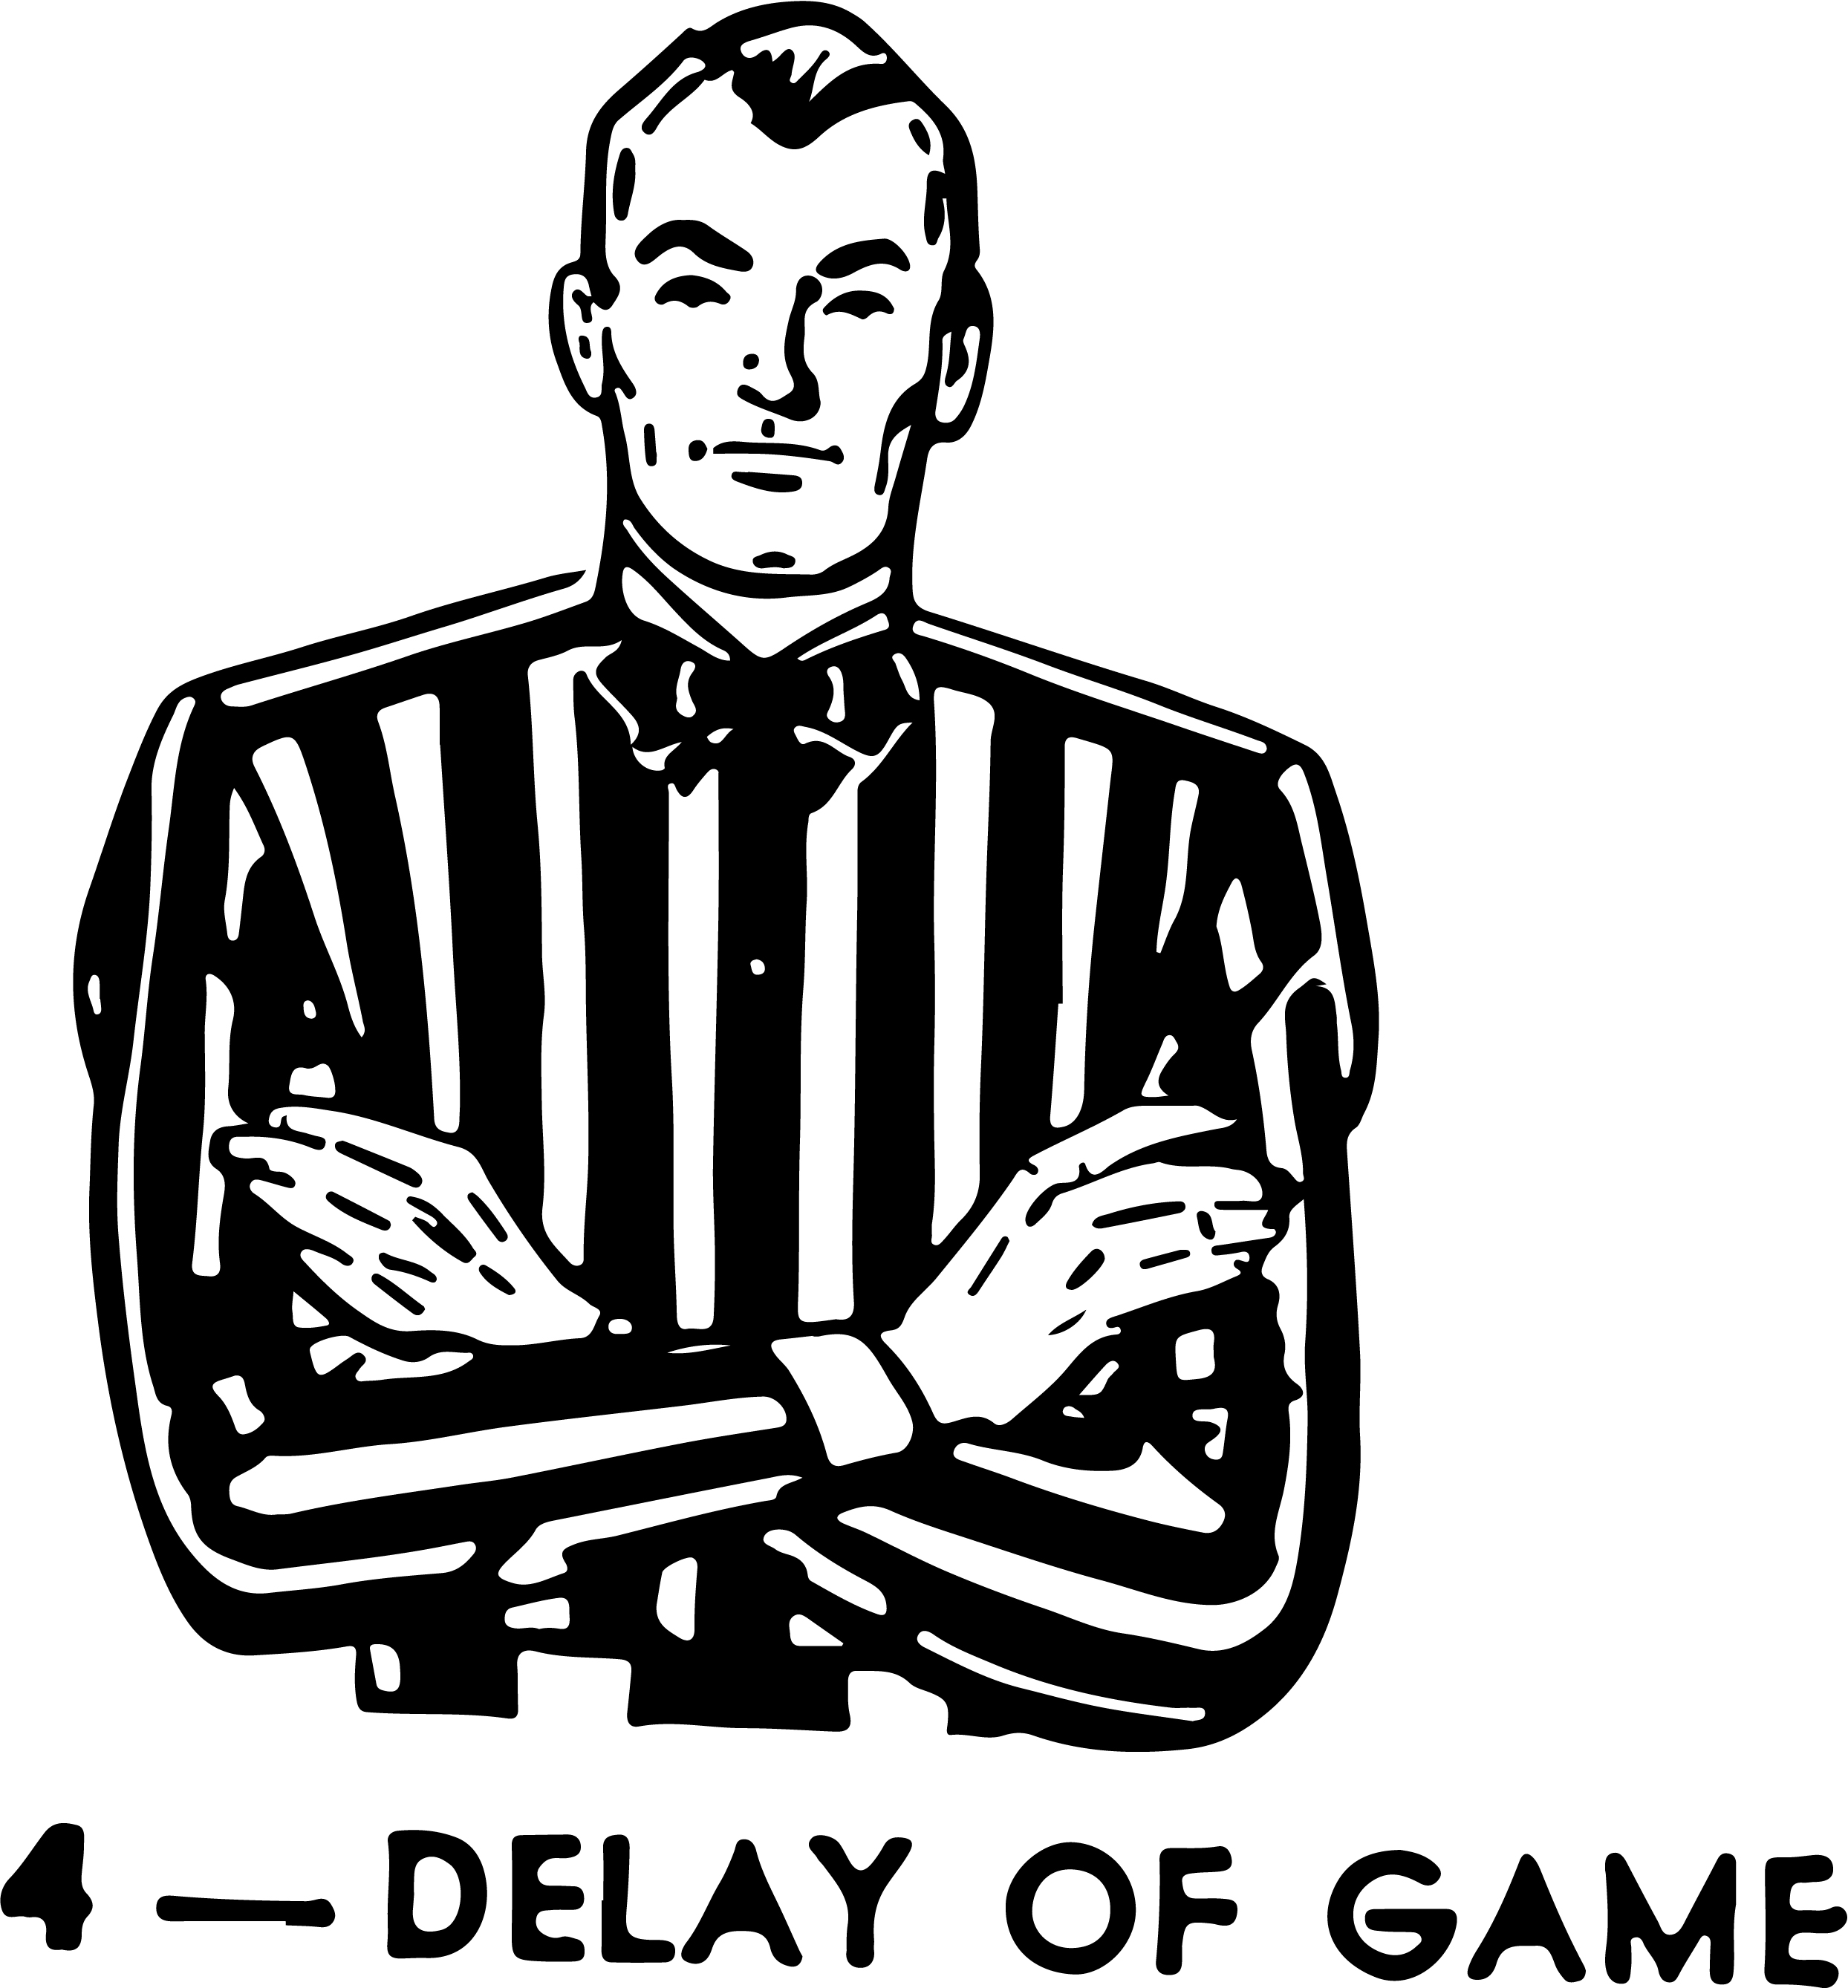 American Football Referee Signals Digital Clip Art - JPGs, PNGs, and ...